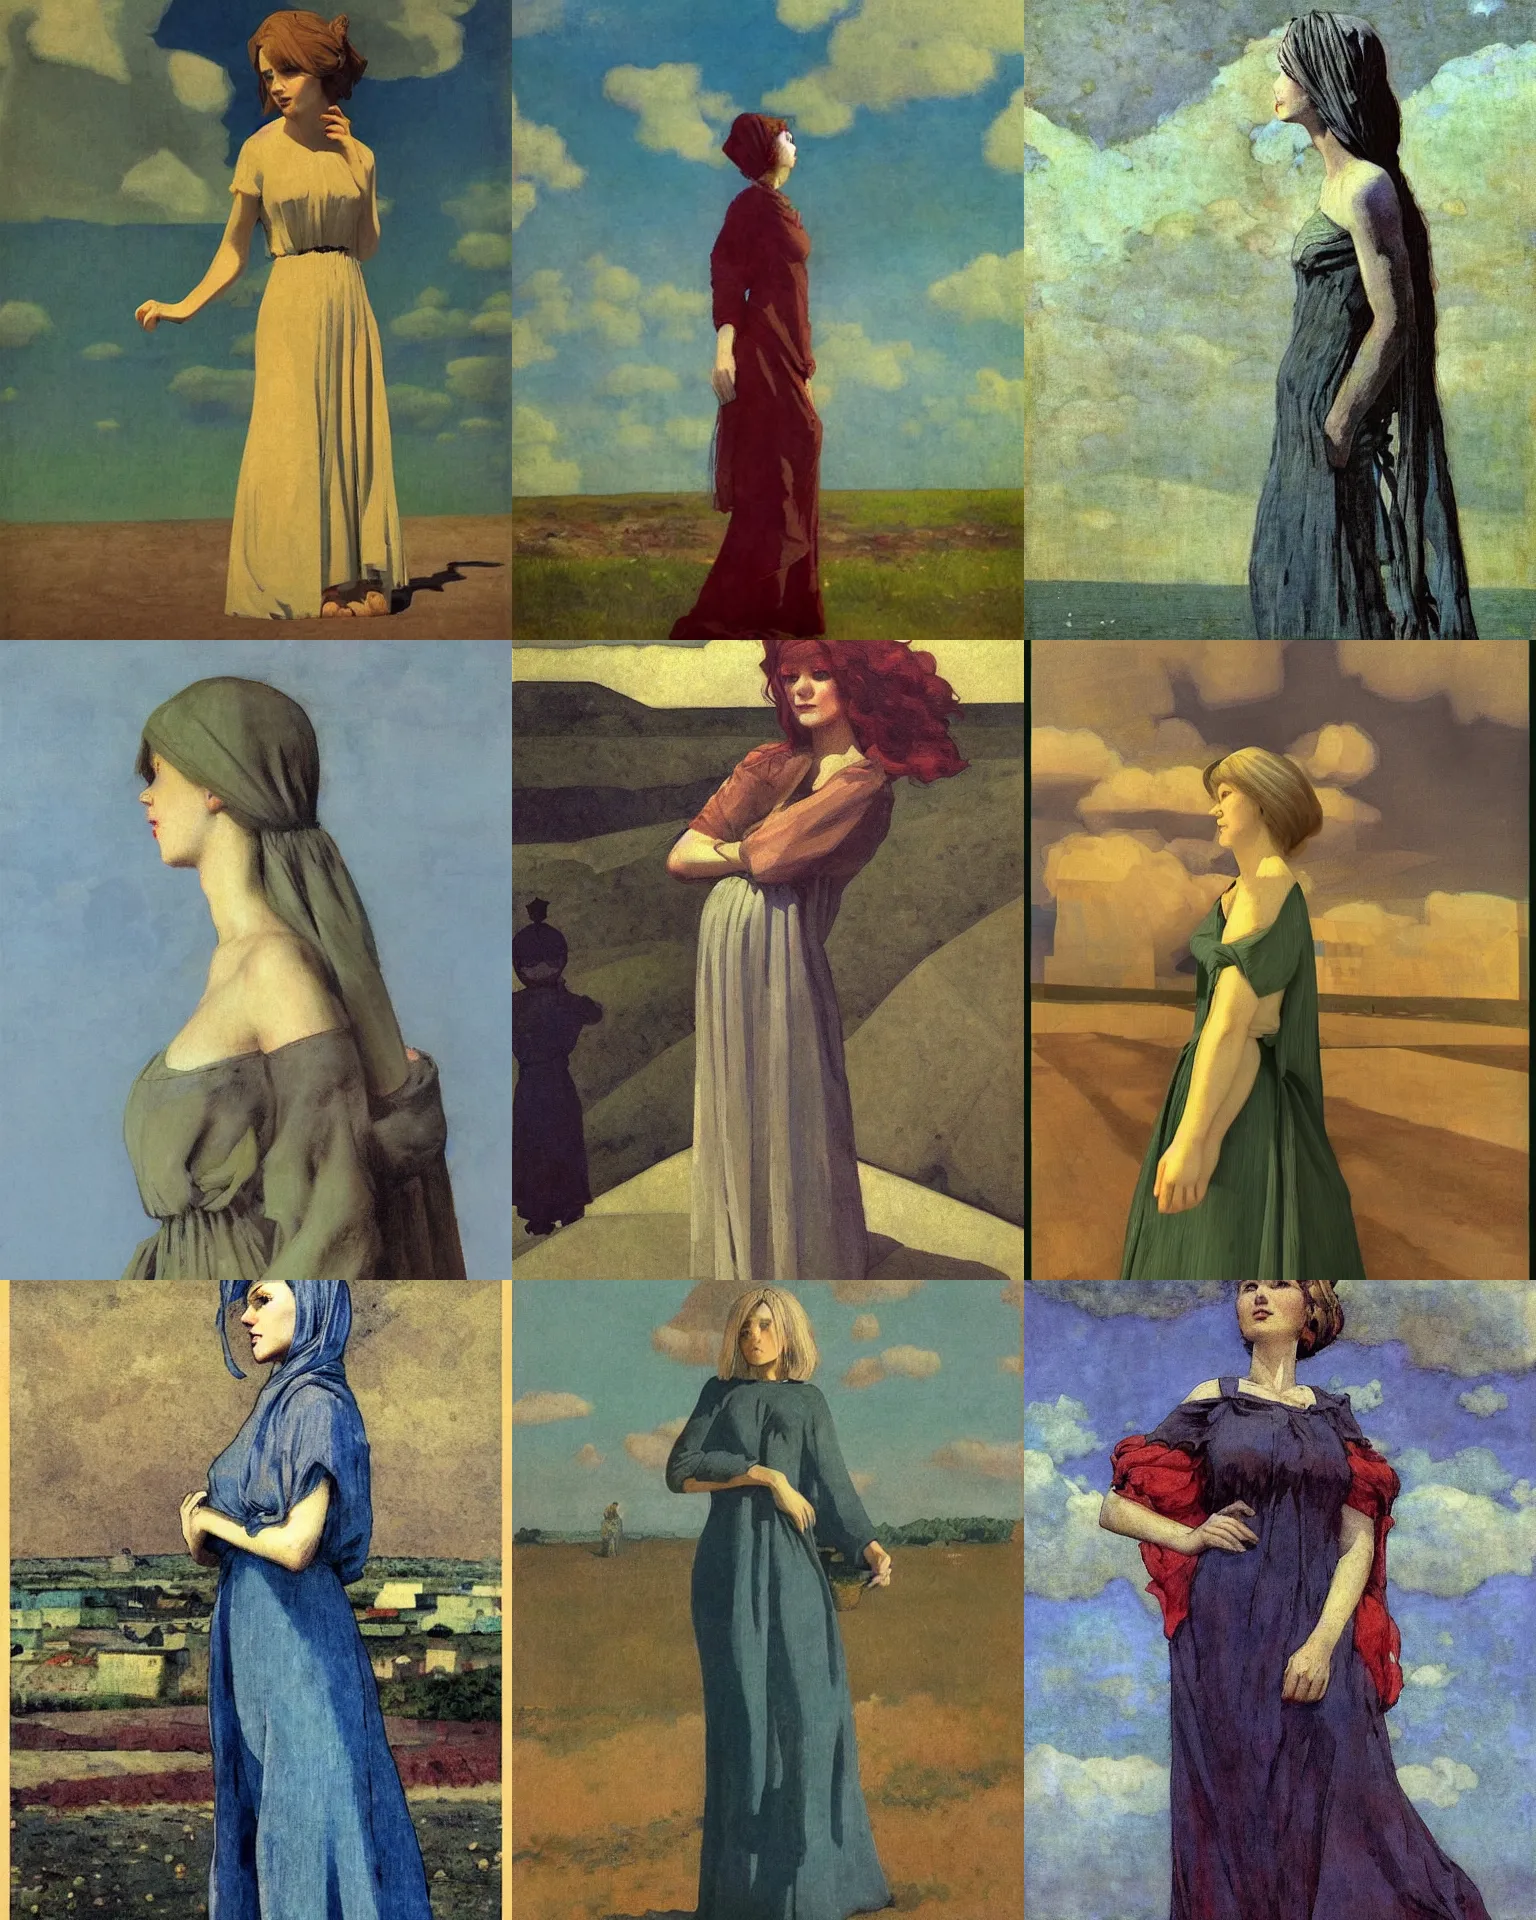 Prompt: woman portrait, female figure in maxi dress, sky, thunder clouds modernism, low poly, low poly, low poly, industrial, soviet painting, social realism, barocco, ilya repin style, john bauer style, anime,